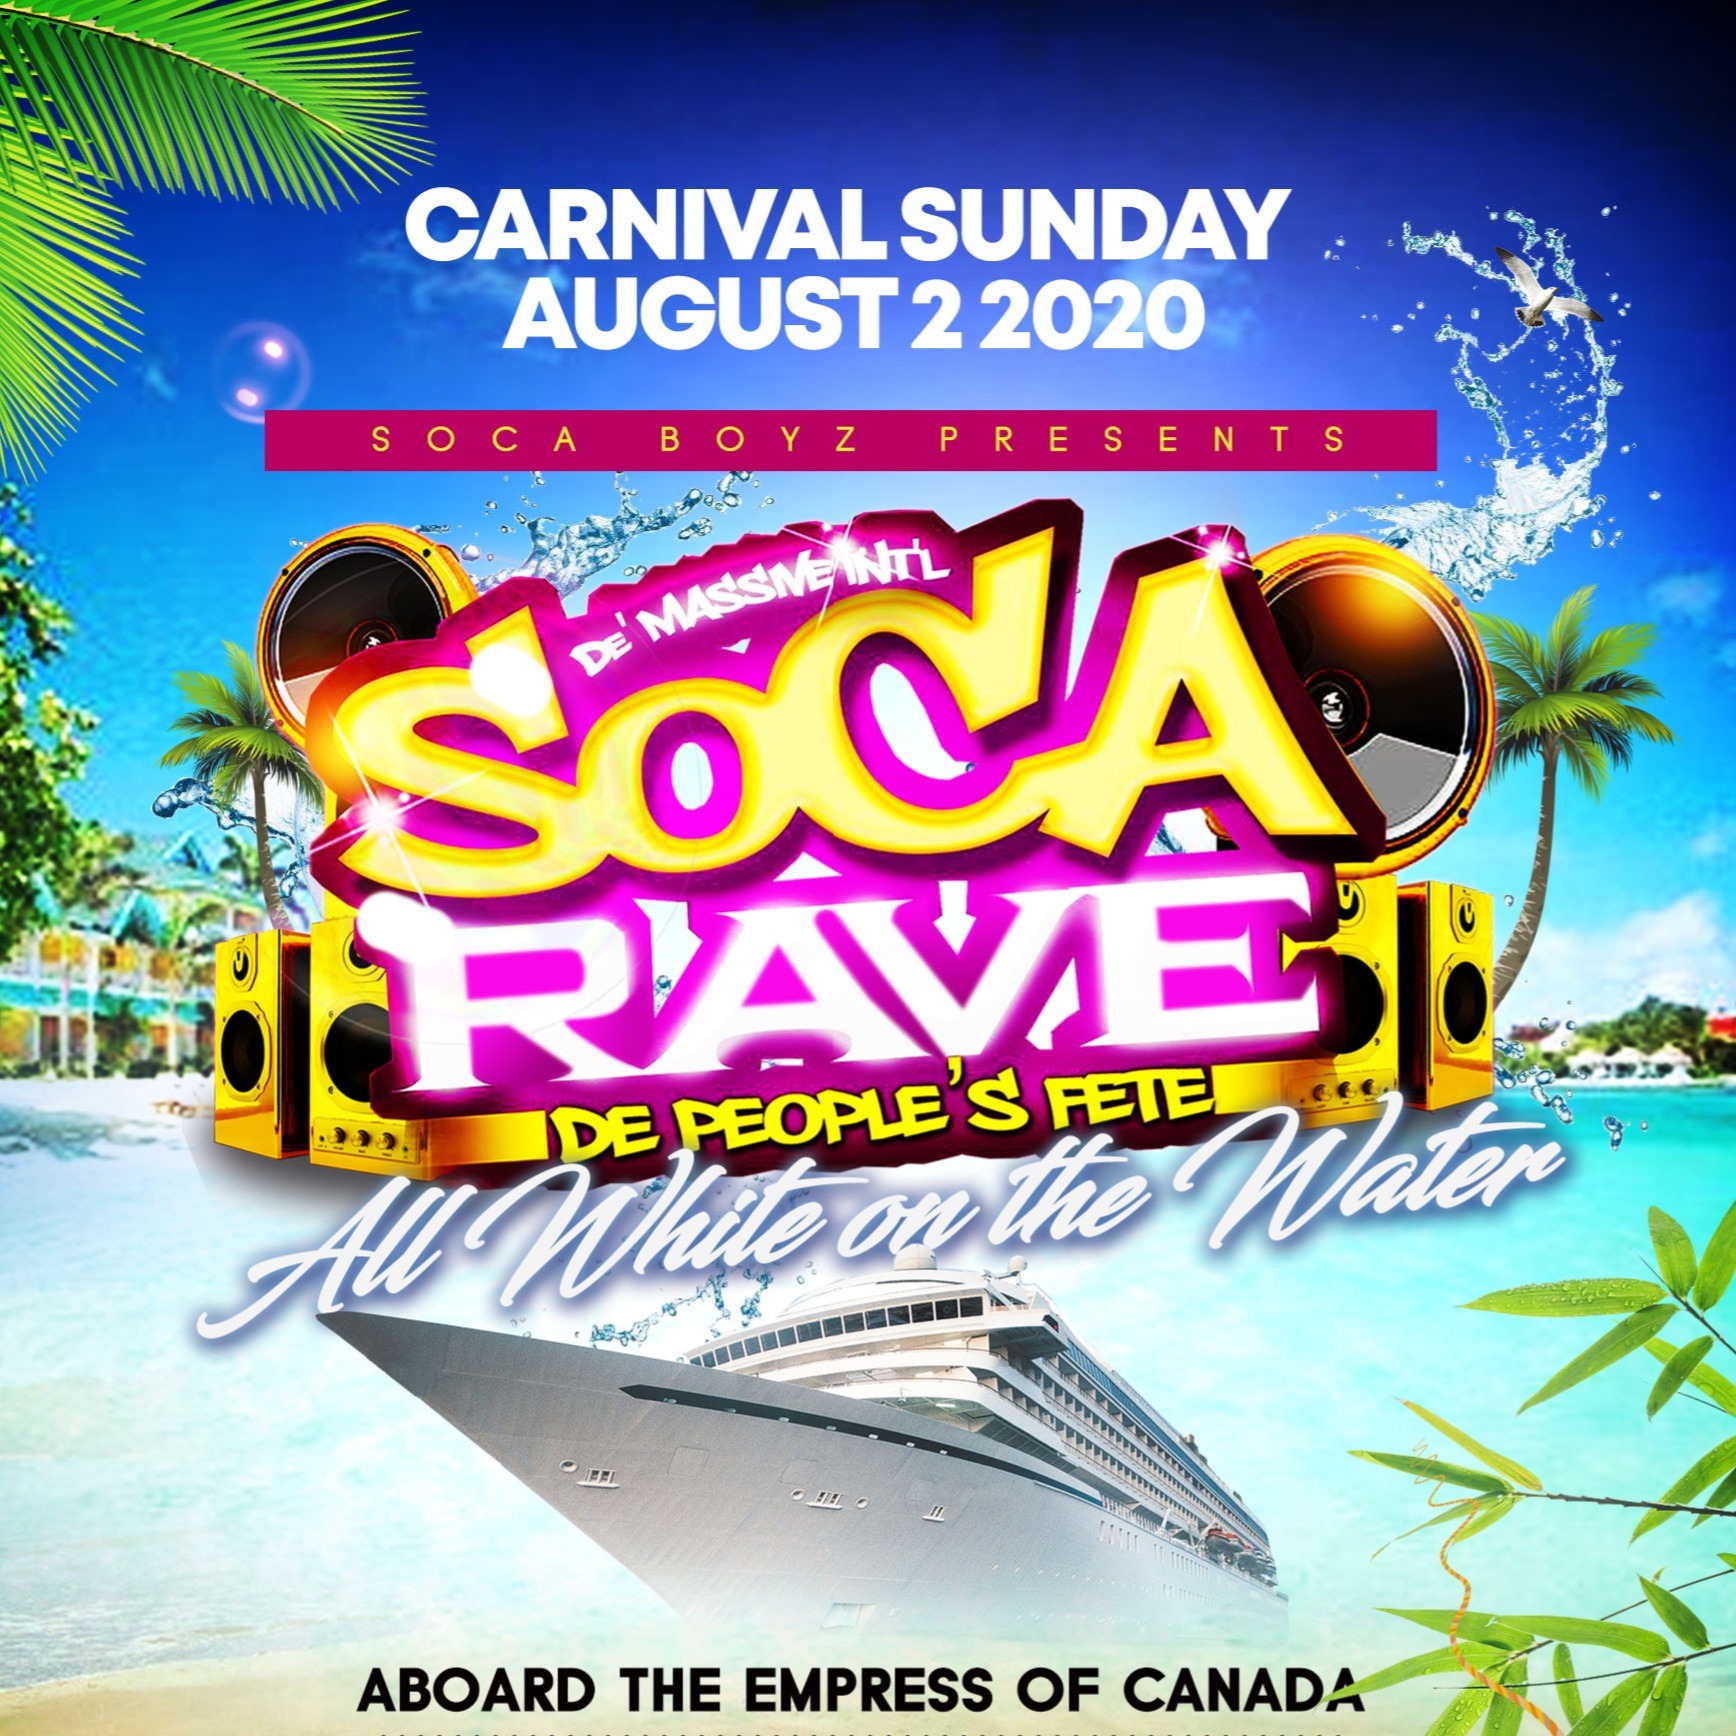 Soca Rave - All White On The Water Carnival 2020